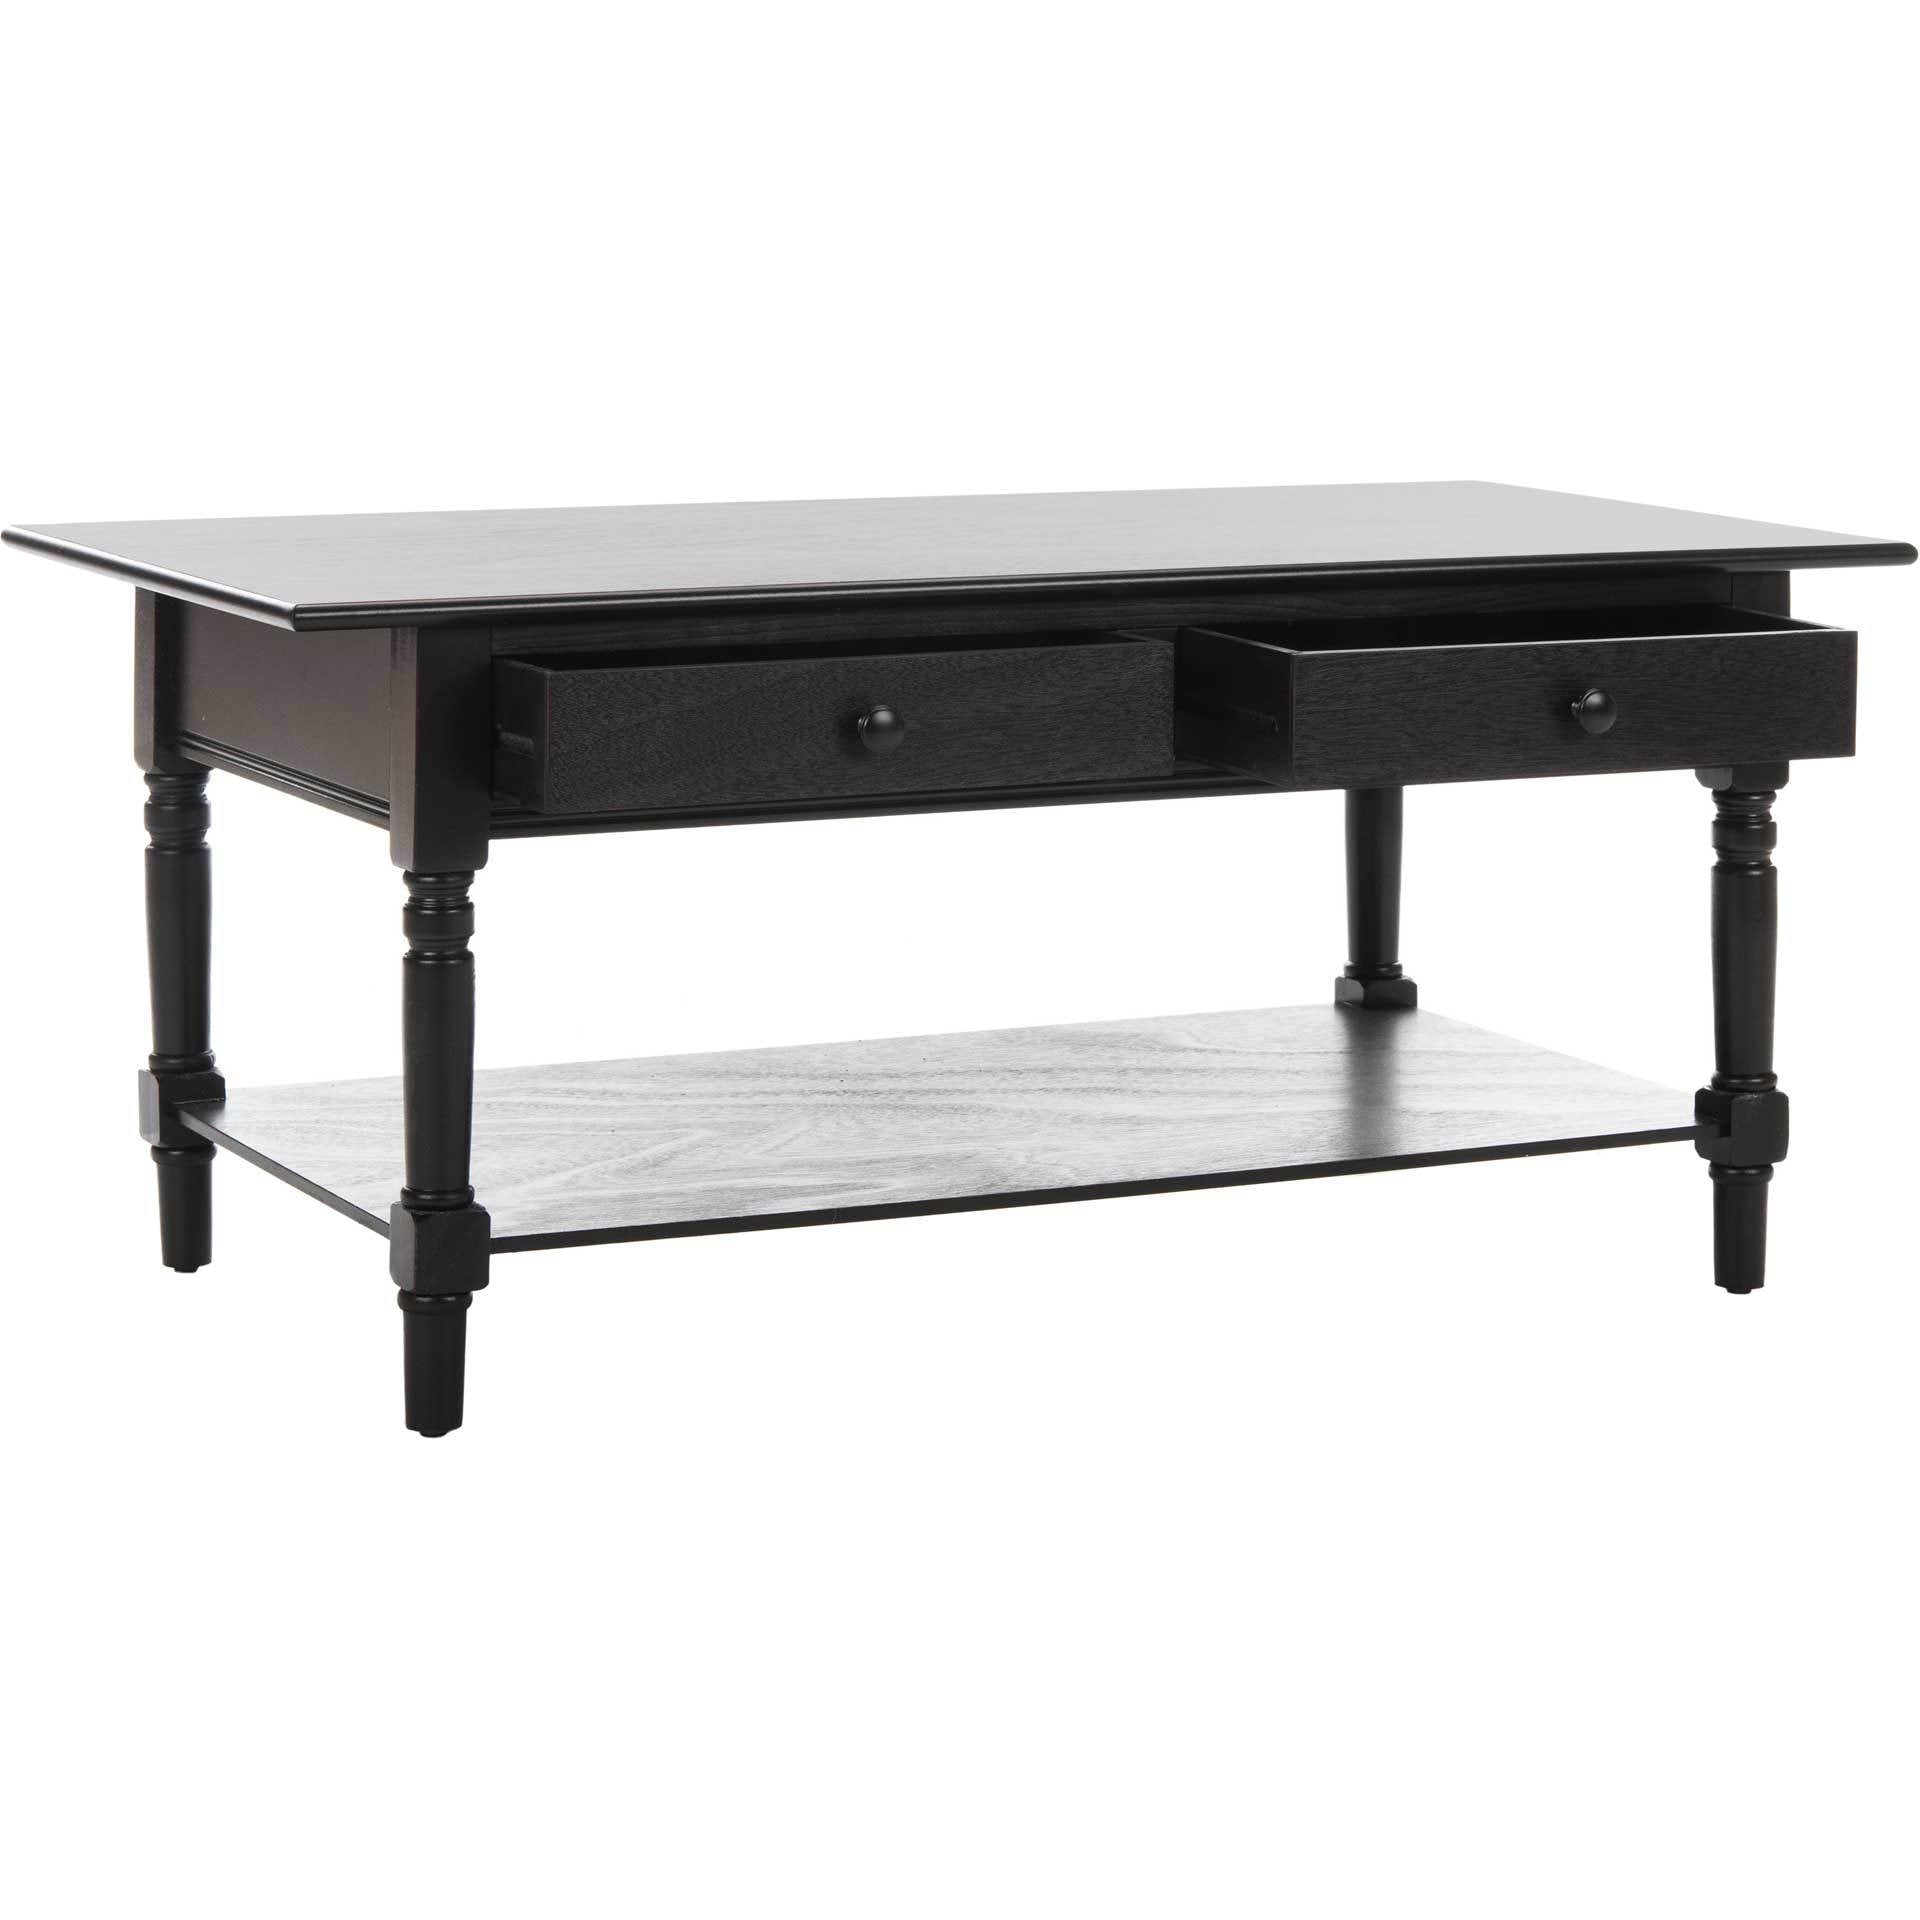 Bobby 2 Drawer Coffee Table Distressed Black